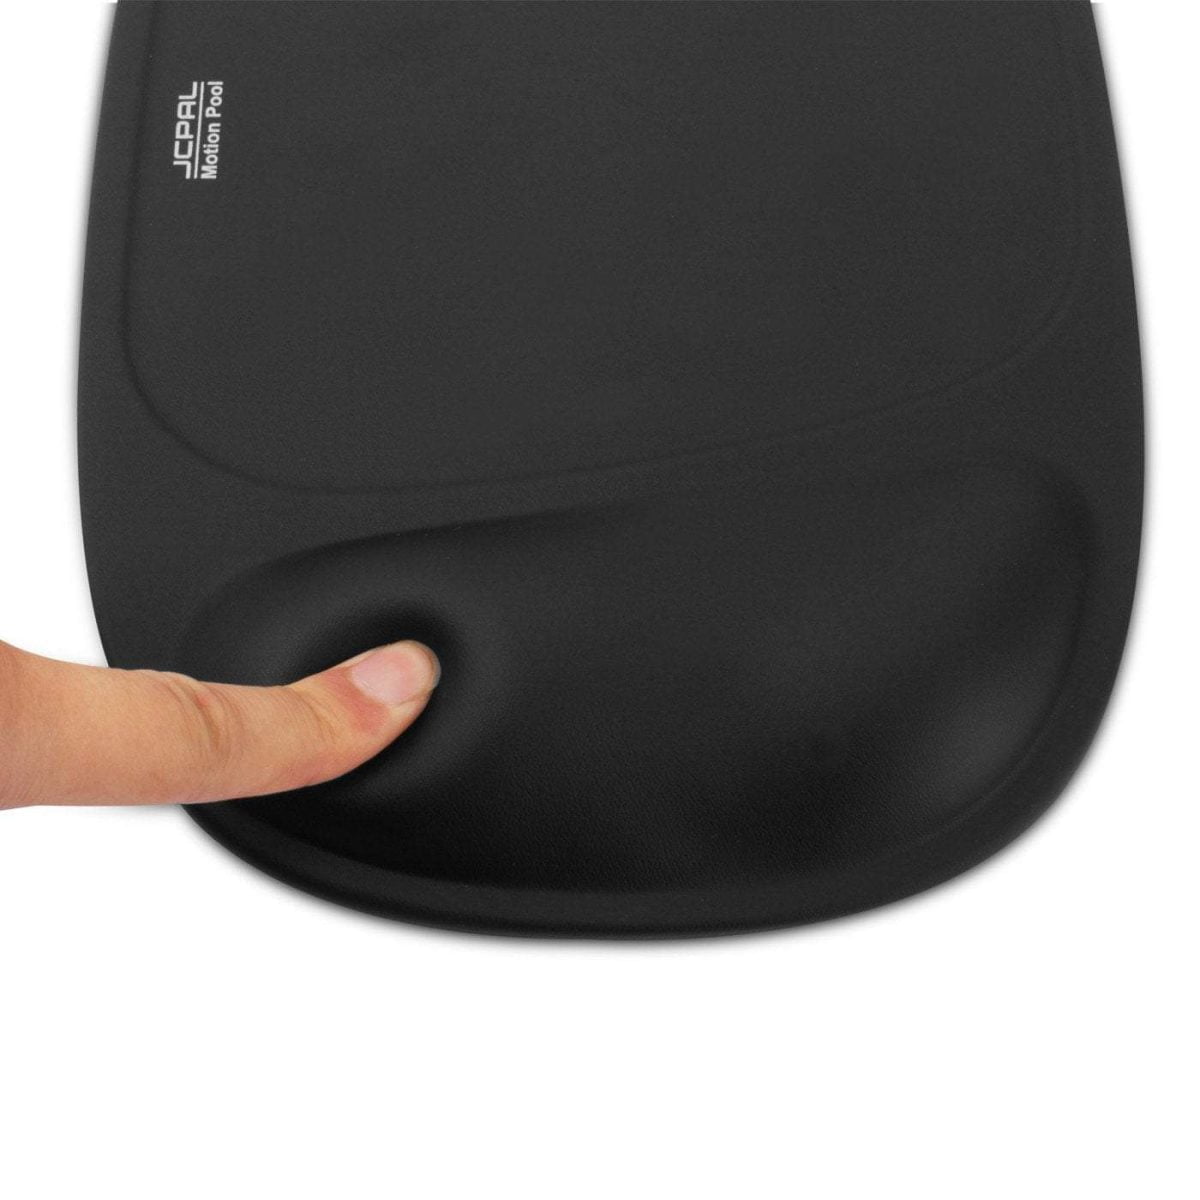 Jcpal Accessories Comforpad Ergonomic Mouse Pad &Lt;H1 Class=&Quot;Product_Name Title&Quot;&Gt;Comforpad Ergonomic Mouse Pad&Lt;/H1&Gt; With An Integrated Foam Wrist Rest, The Comfortpad Mouse Pad Offers Comfortable Support For Your Wrist To Prevent Fatigue And Strain During Extended Computer Sessions. The Large Mousing Area Has A Smooth Surface For Quick And Comfortable Movement And Is Finely Textured For Accurate Optical And Laser Mouse Tracking. The Comforpad Also Features A Non-Slip Backing Which Effectively Prevents Shifting And Slipping During Use. &Lt;Strong&Gt;Dimensions Width:&Lt;/Strong&Gt; 180Mm &Lt;Strong&Gt;Length:&Lt;/Strong&Gt; 260Mm &Lt;Strong&Gt;Thickness:&Lt;/Strong&Gt; Wrist Pad: 20Mm, Mouse Area: 7Mm Comforpad Ergonomic Mouse Pad Jcpal - Jcp6057 Comforpad Ergonomic Mouse Pad Jcpal - Jcp6057